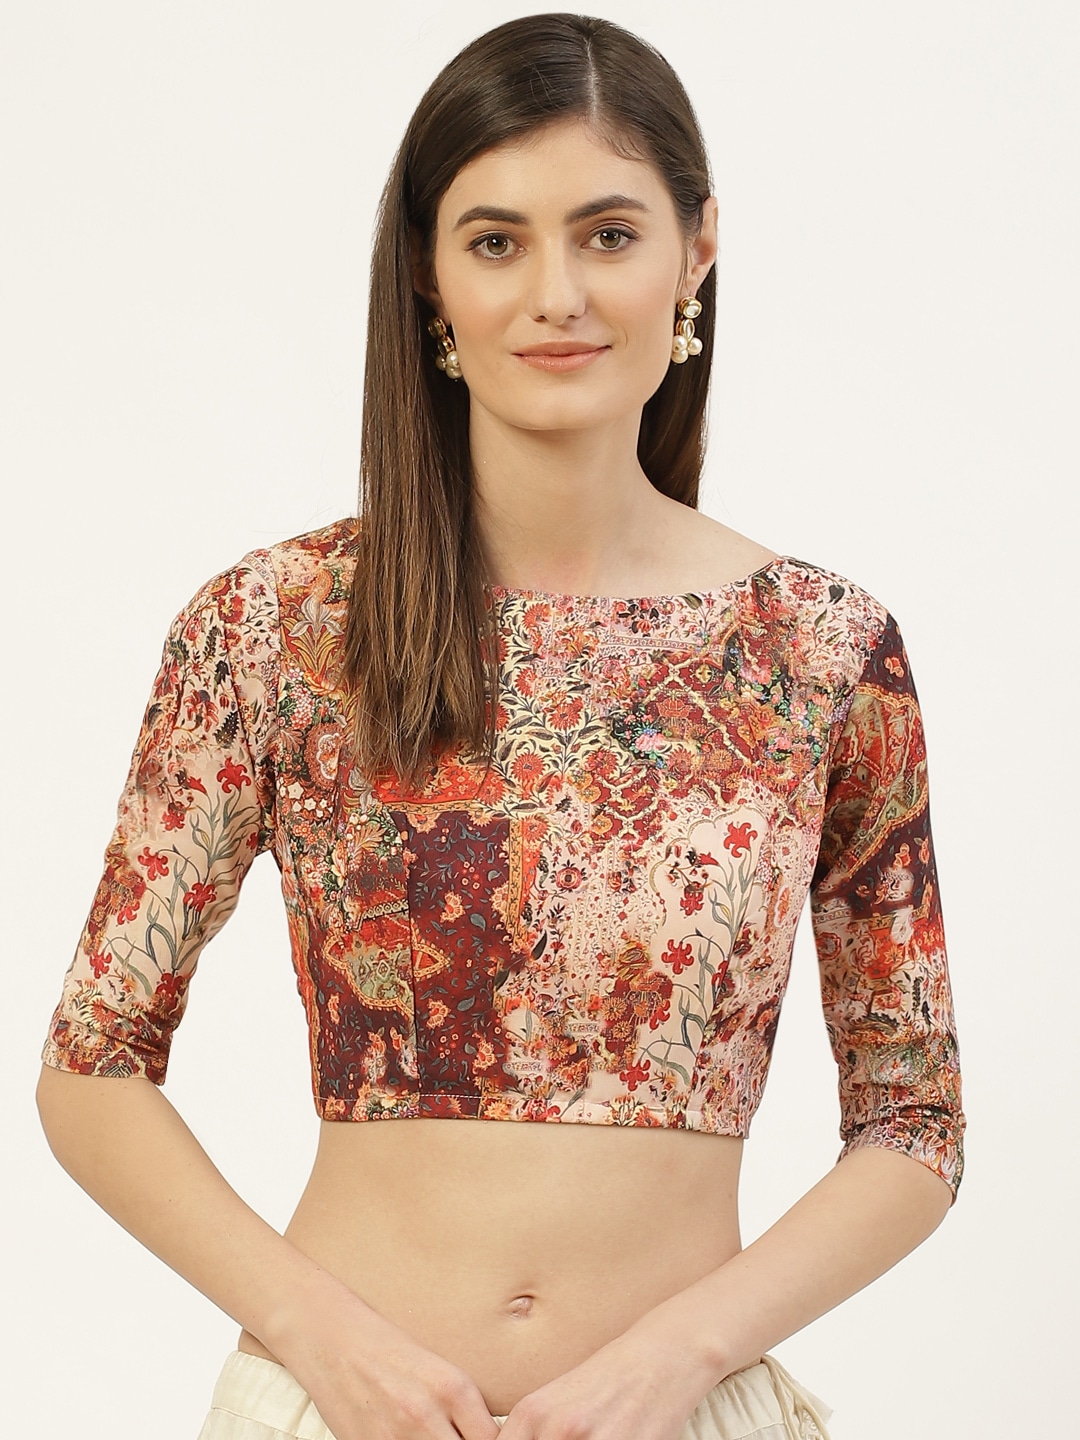 Studio Shringaar Off-White & Maroon Floral Printed Saree Blouse Price in India